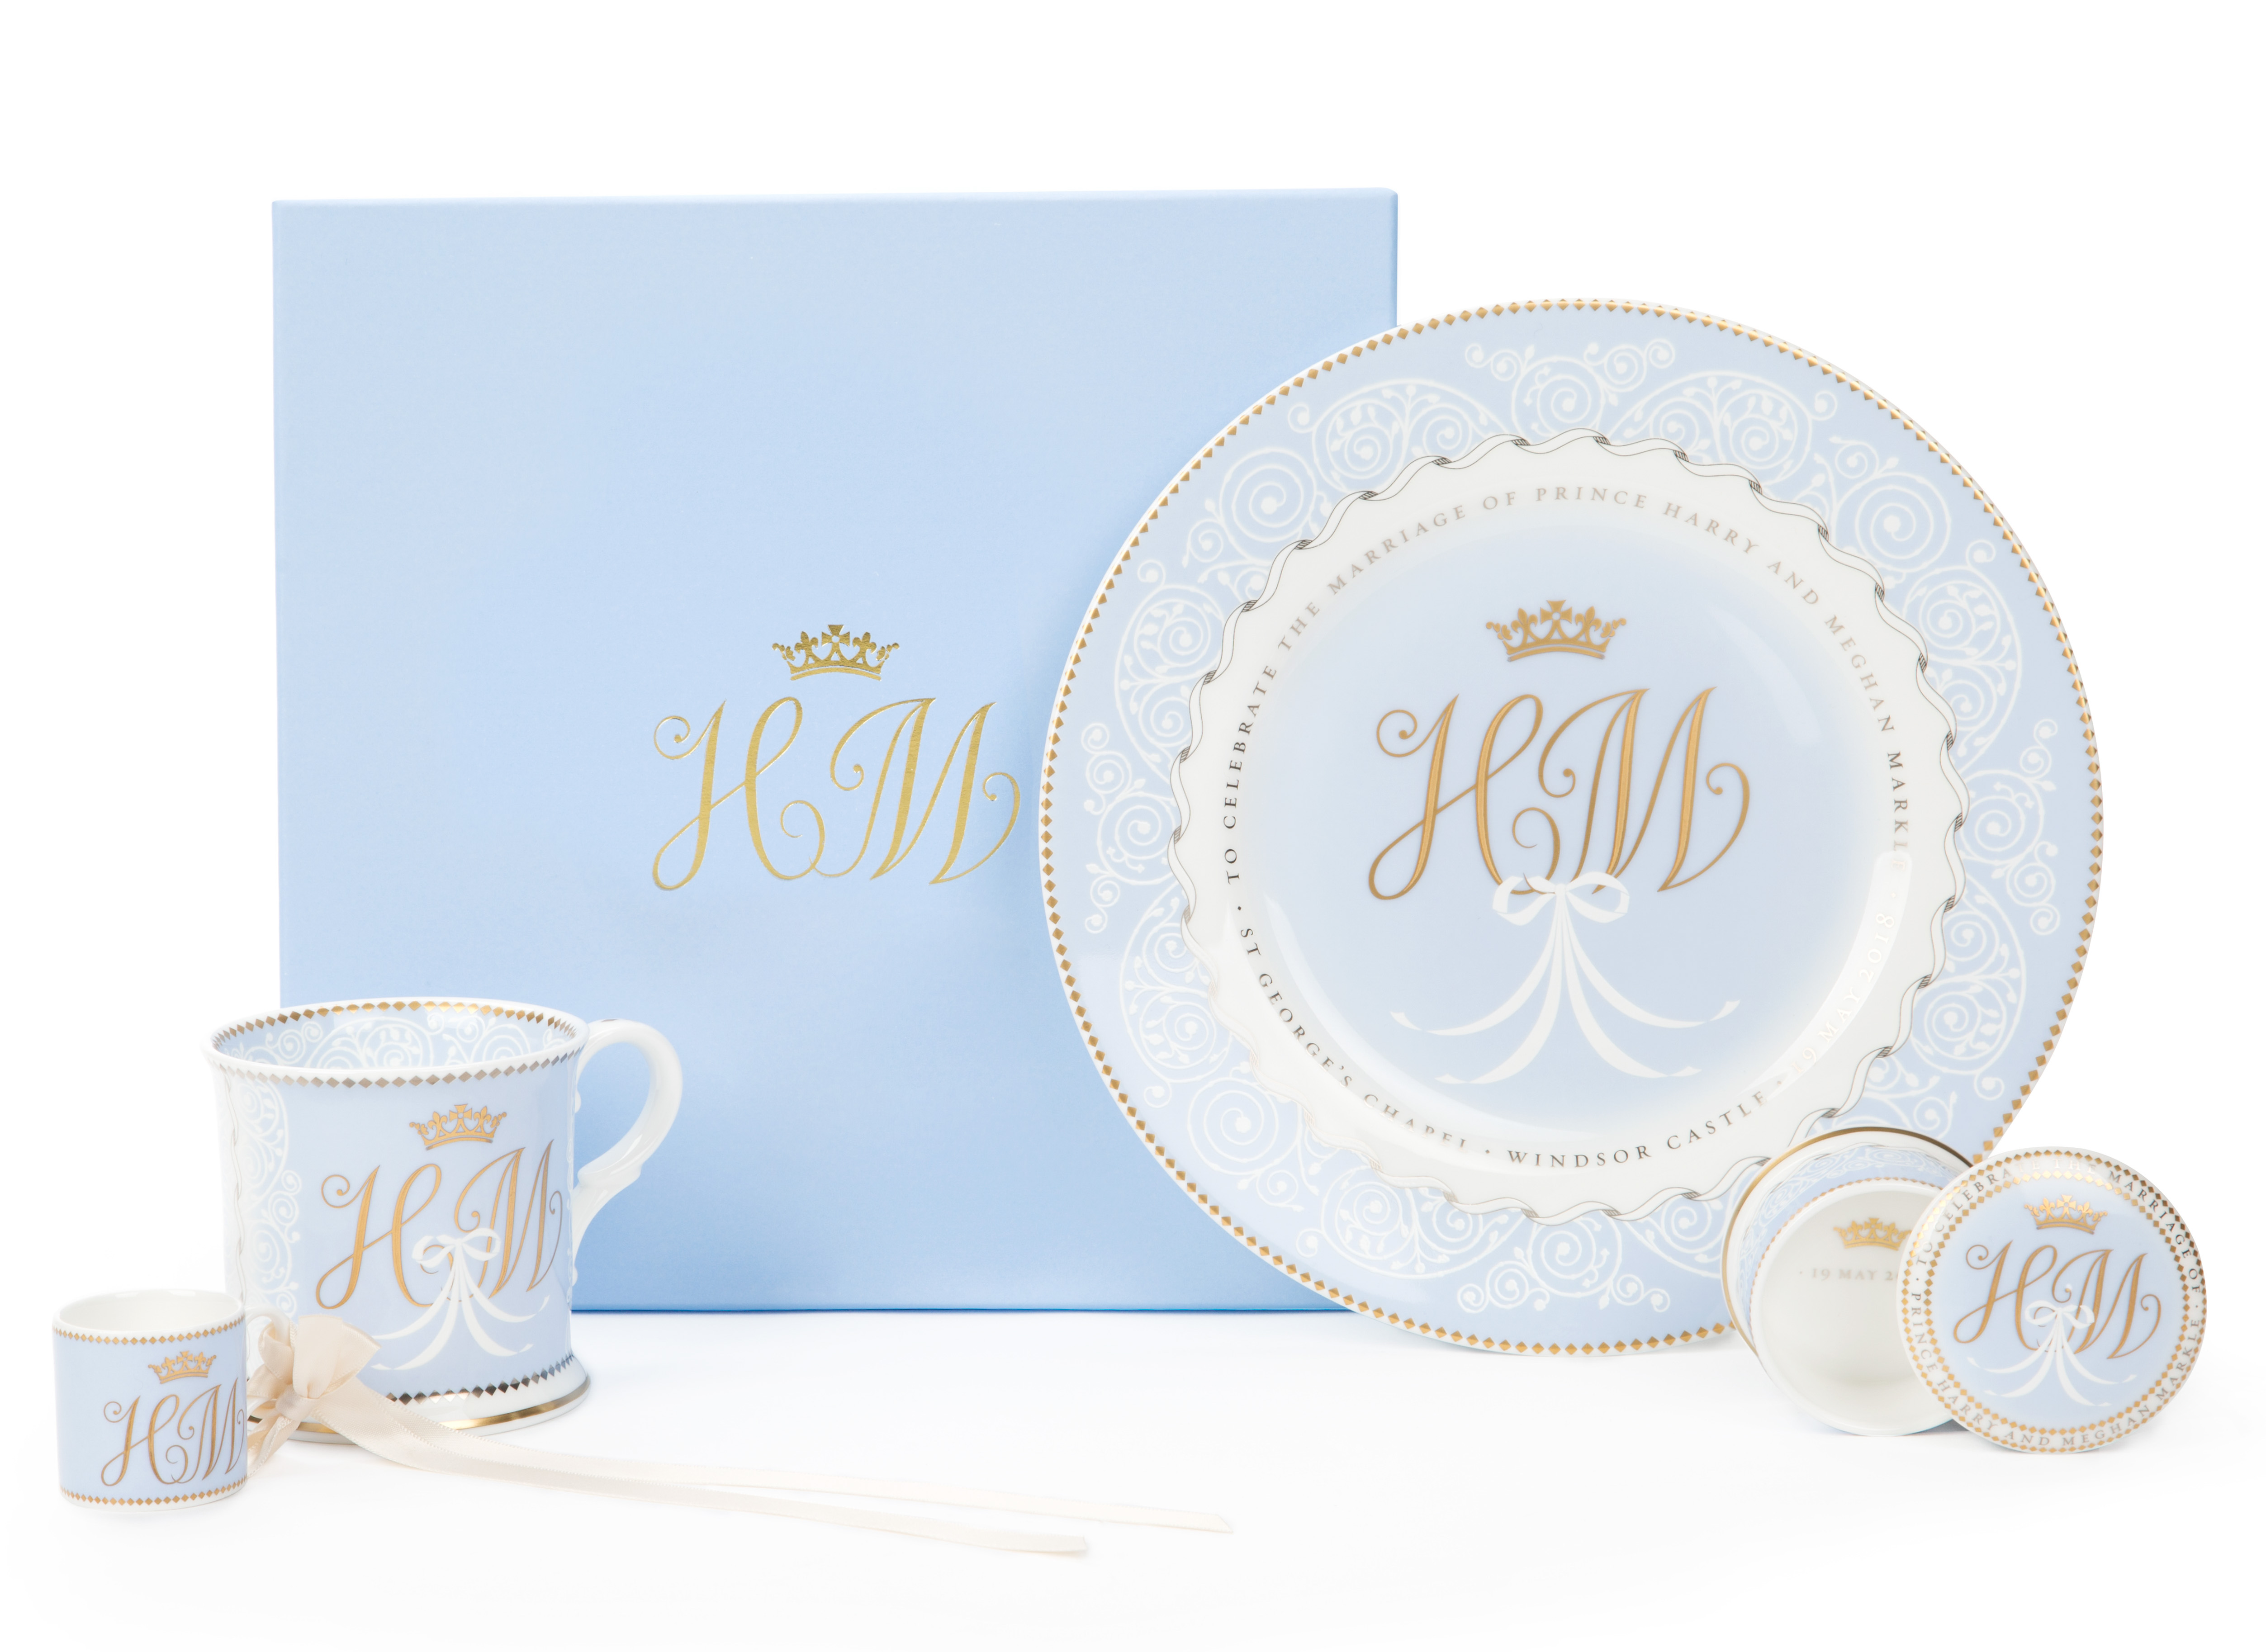 The Duke and Duchess of Sussex's official range of wedding china